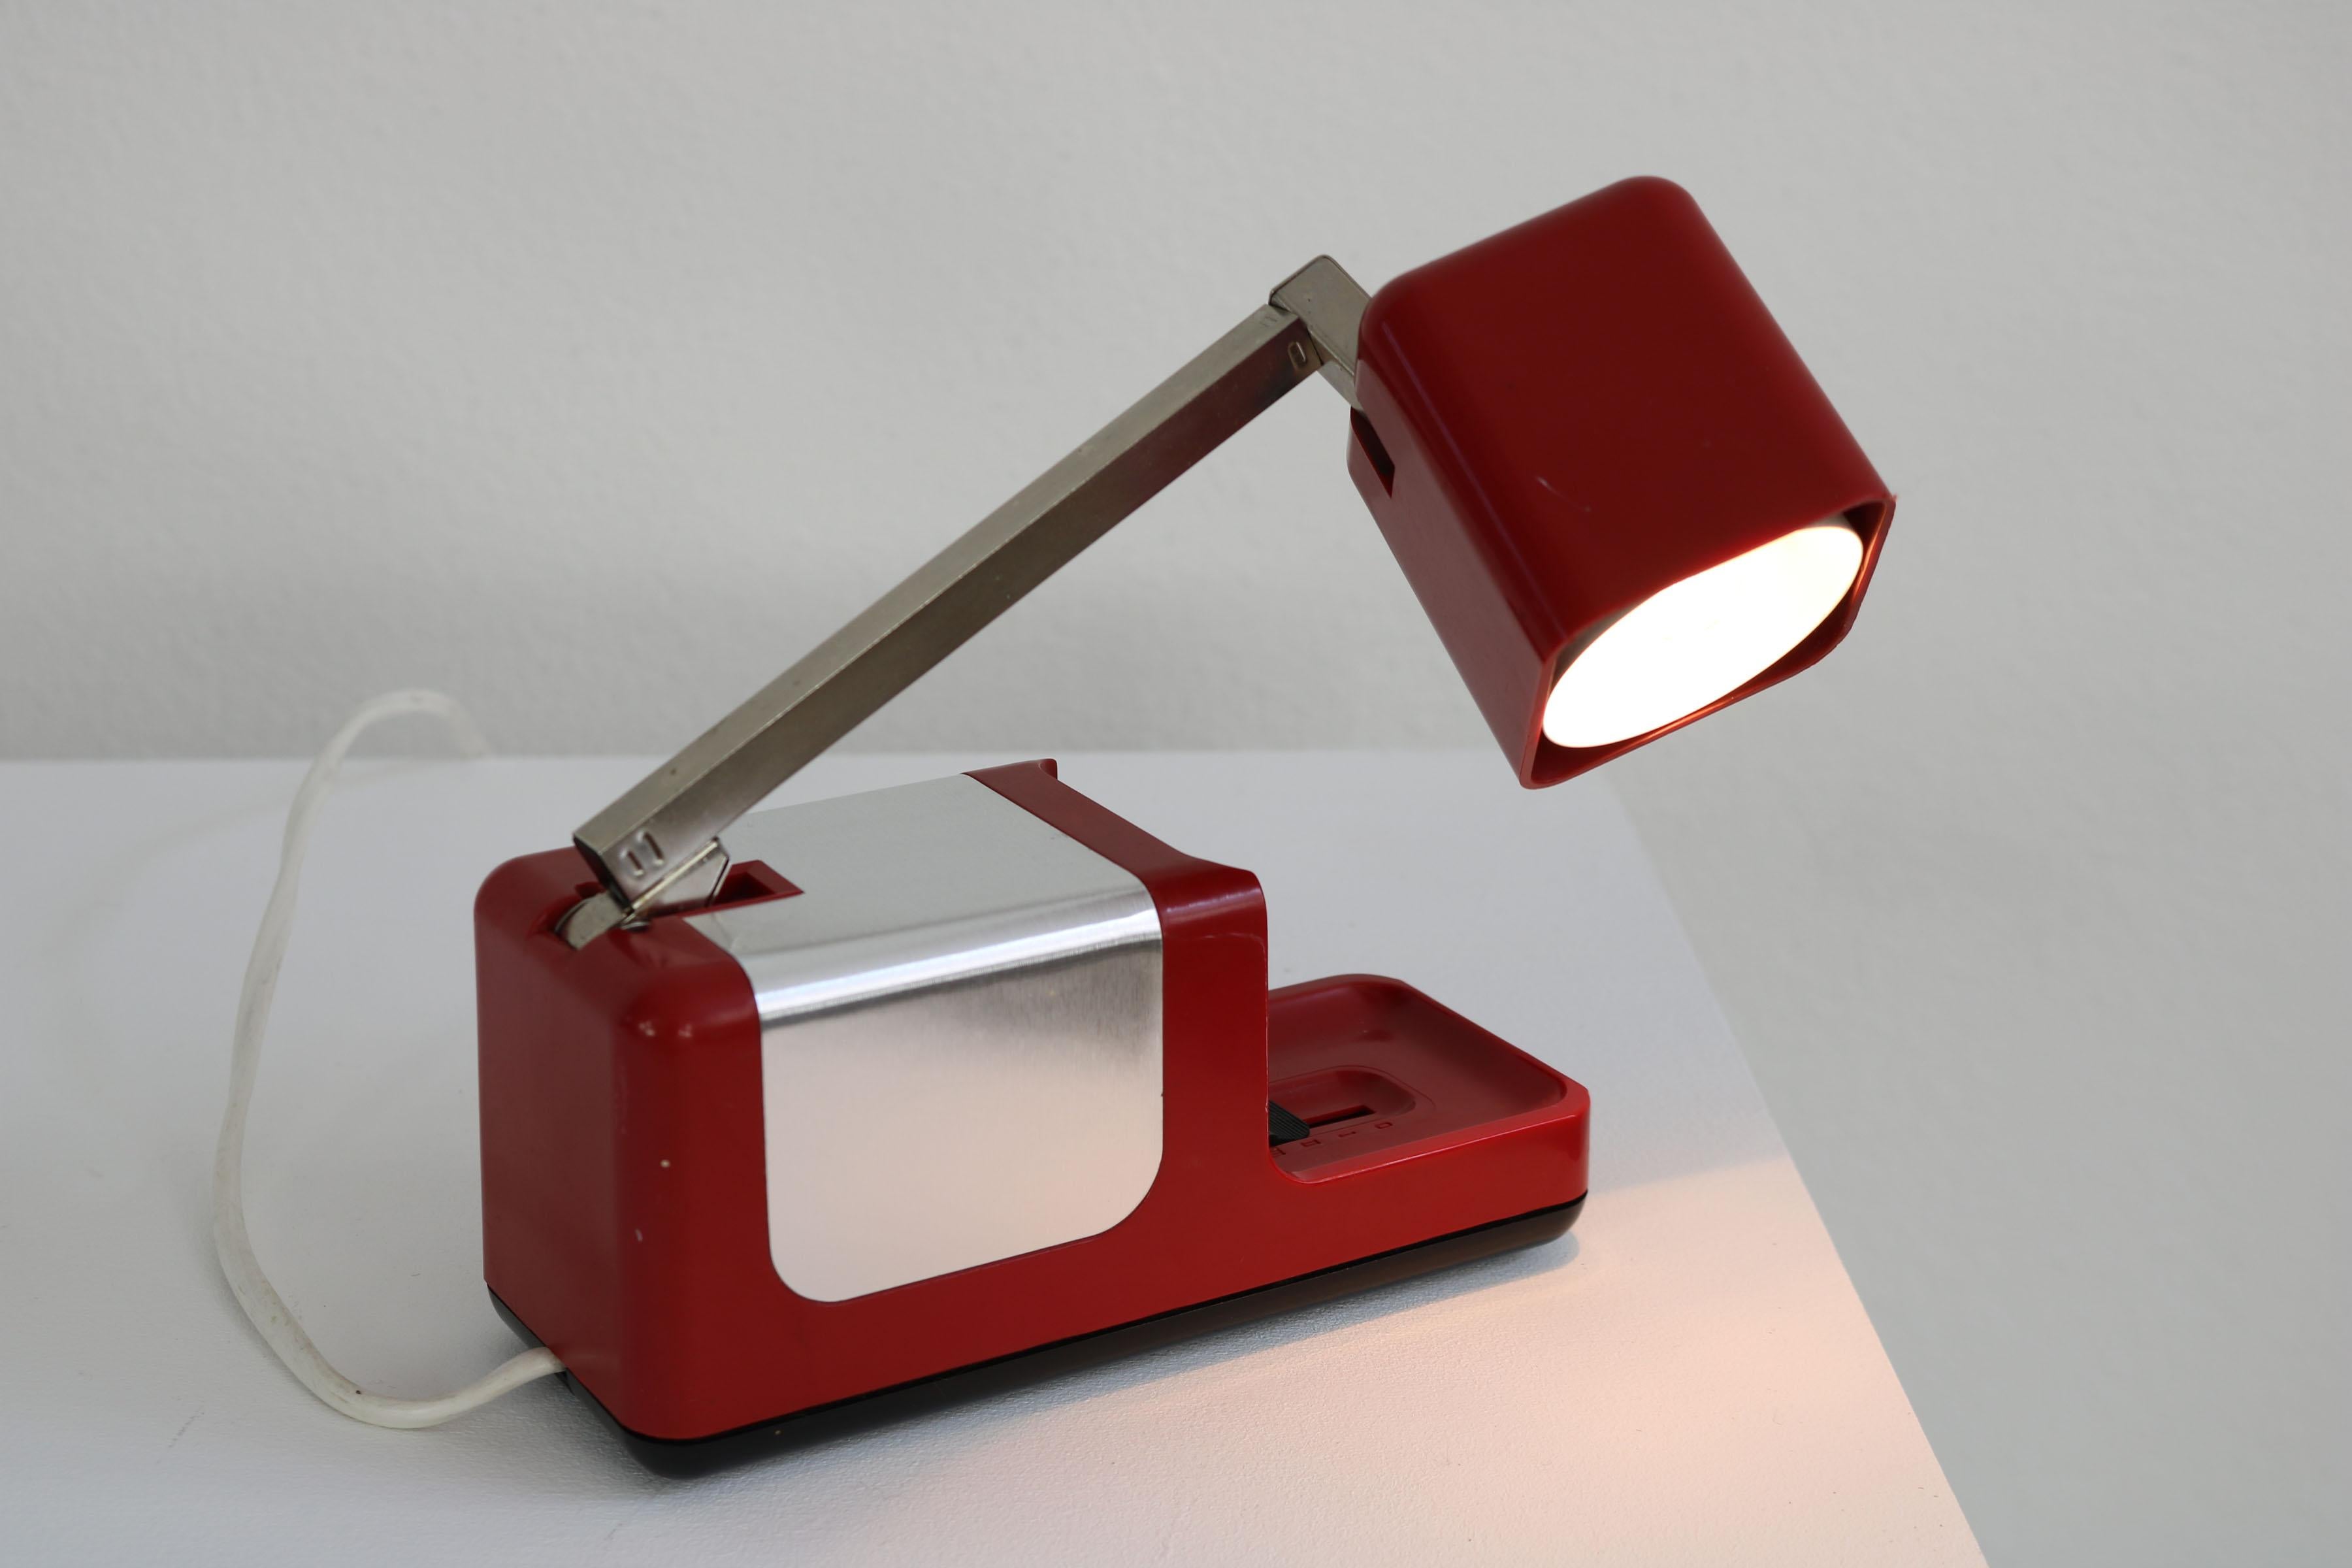 Solis telescopic spotlight 
Pull-out table lamp. Ideal as a reading lamp. 3-step light switch, extendable to approx. 50cm, 12 v car bulbs. Swiss 1970s.